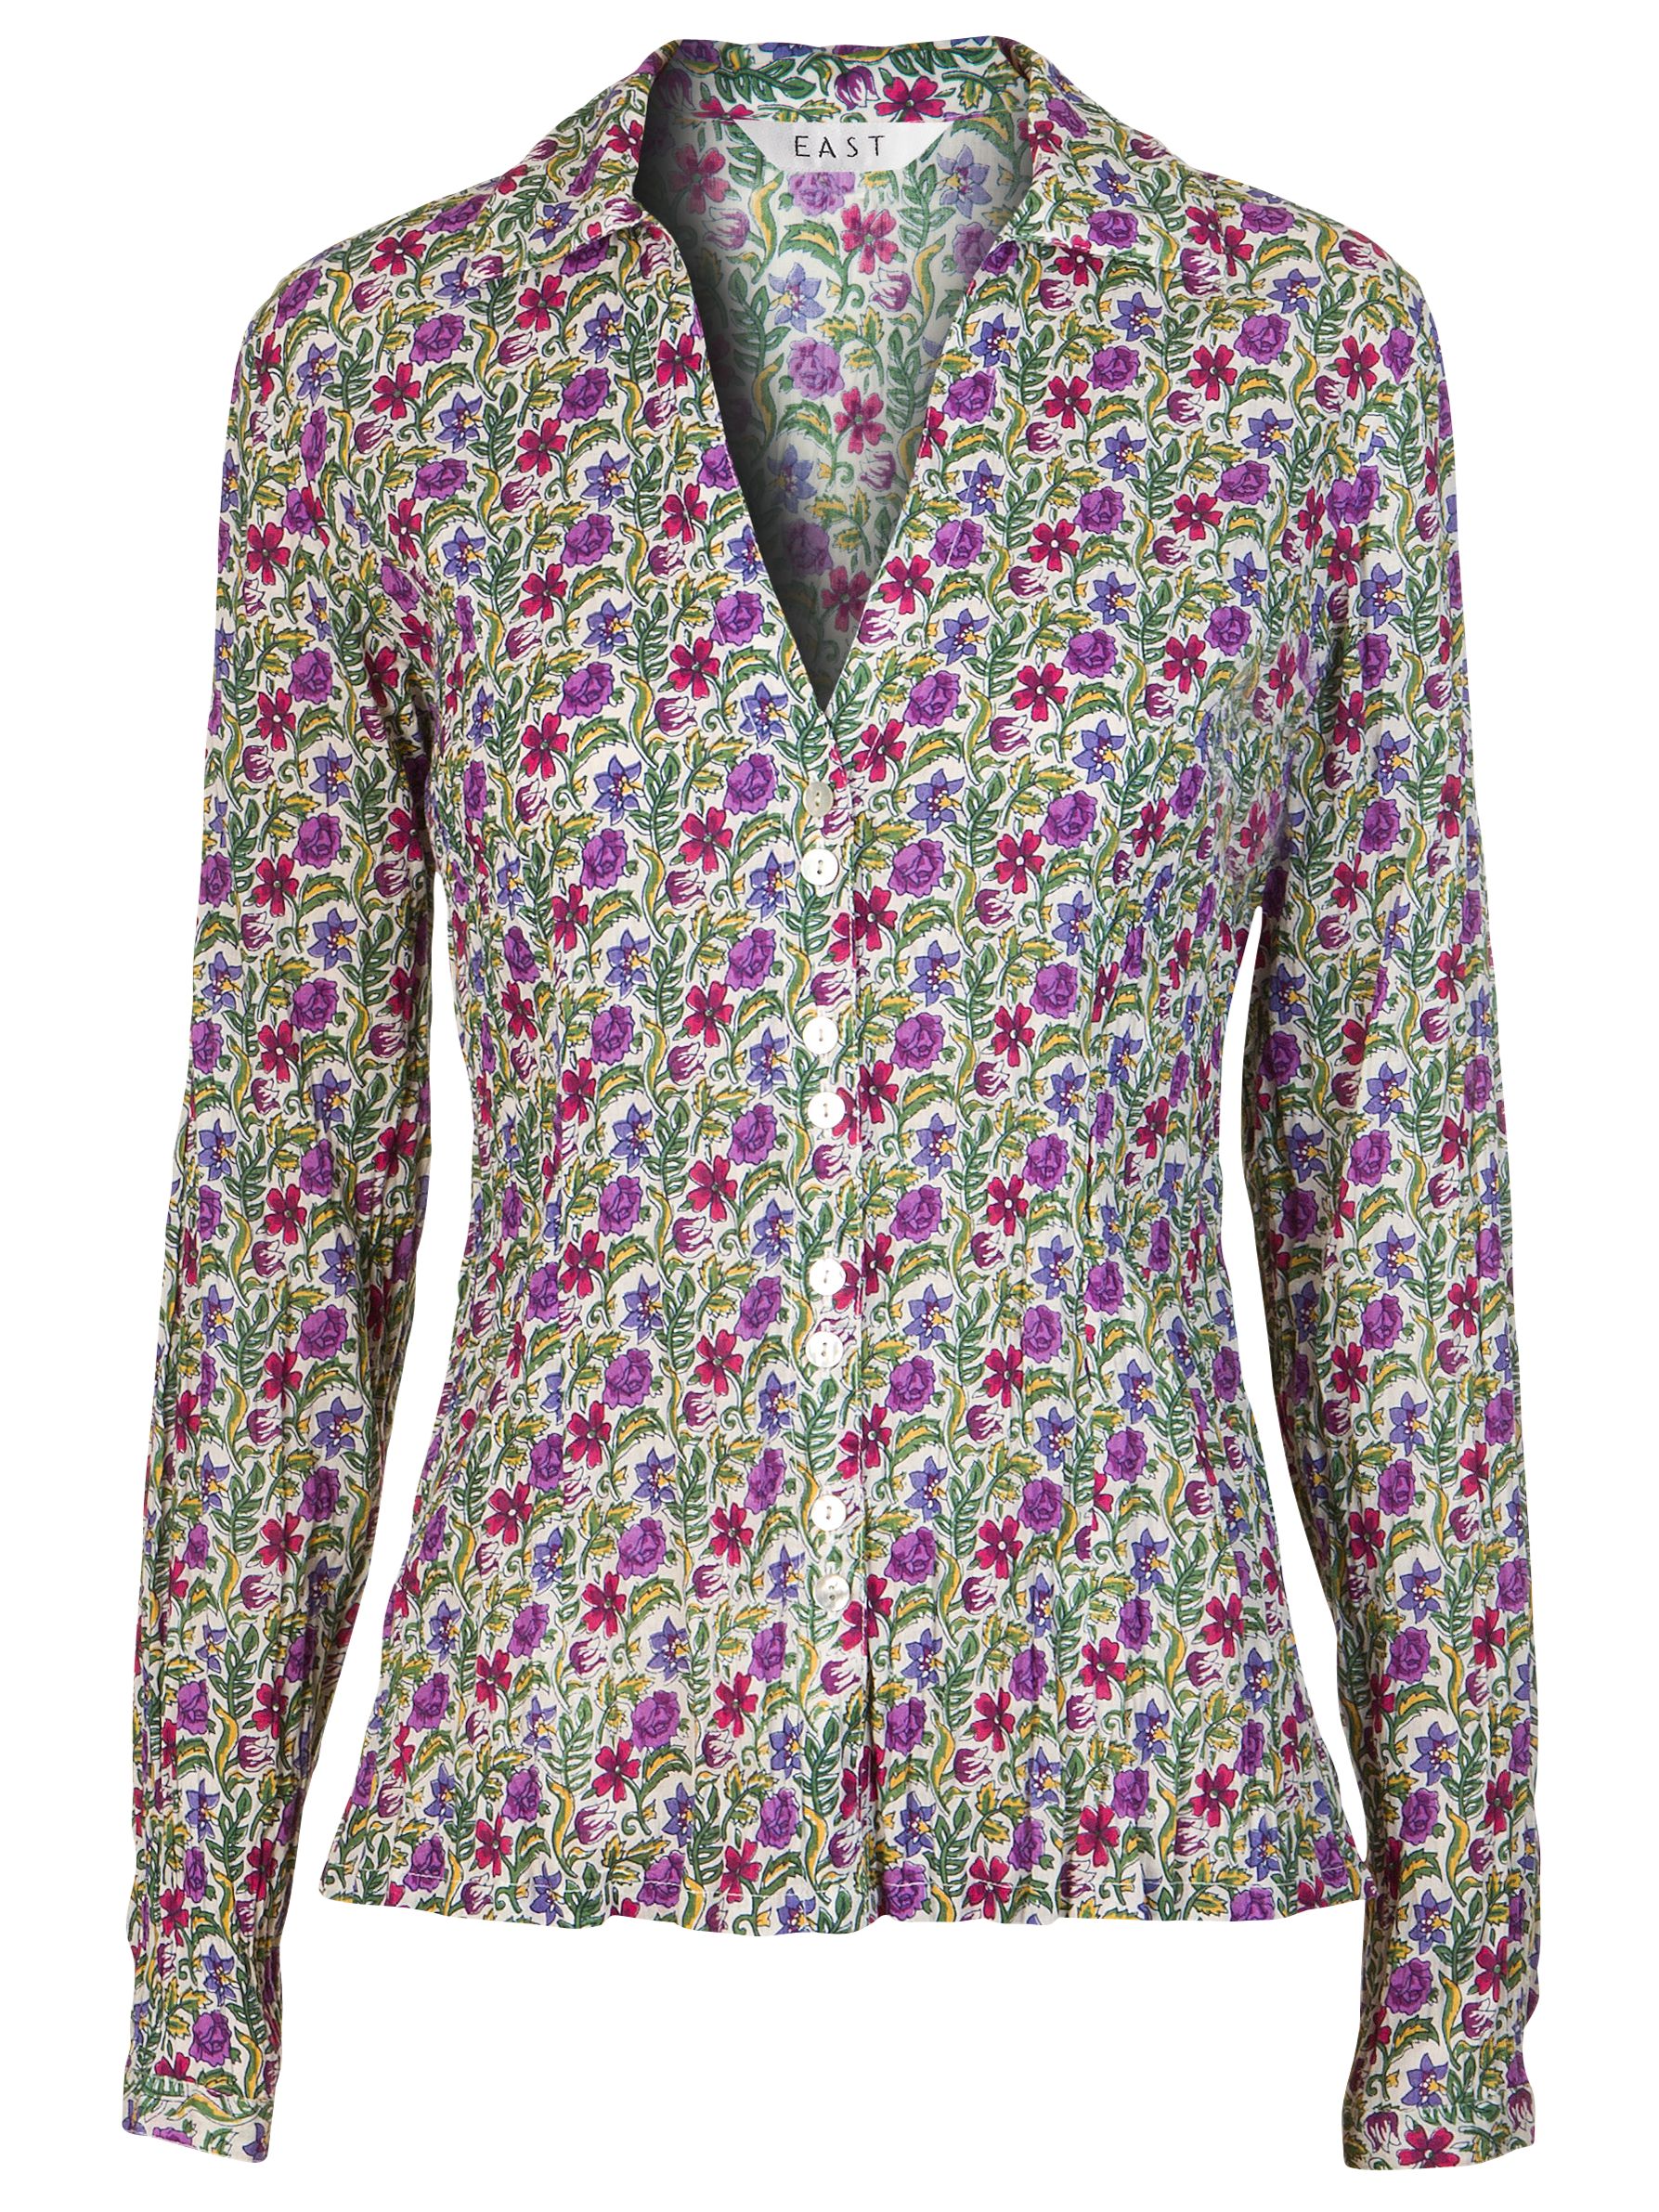 East Floral Print Blouse, White